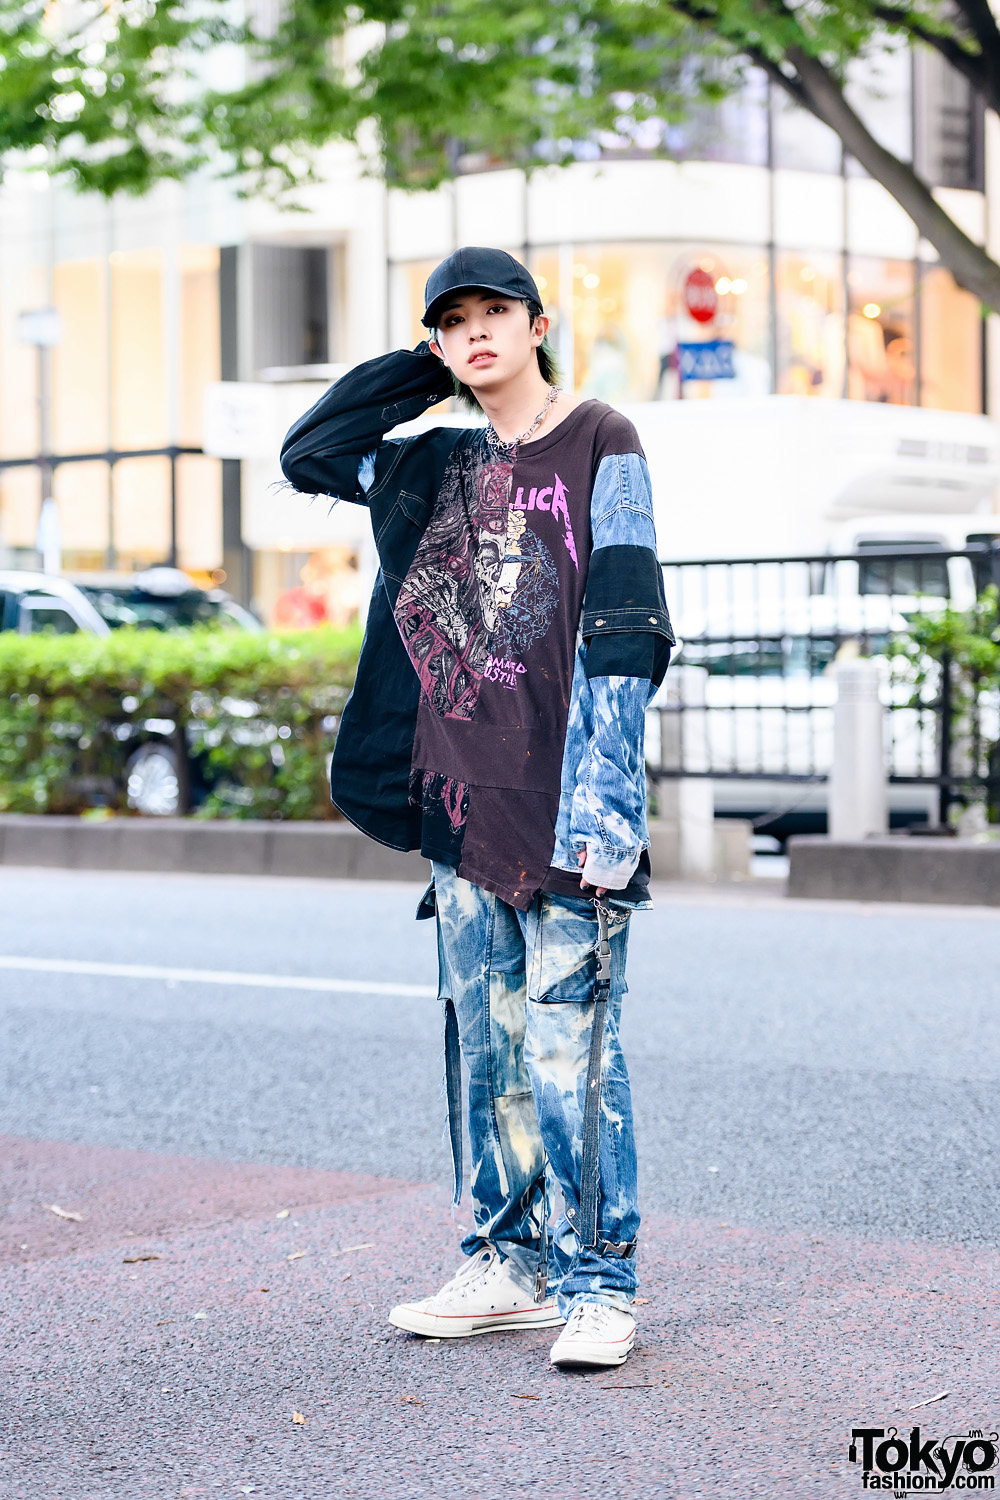 Male Model Cote Mer Fashion w/ Black Cap, Face Mask, Cote Mer Metallica Patchwork Shirt, Cote Mer Jeans, Converse Sneakers & Barbed Wire Necklace